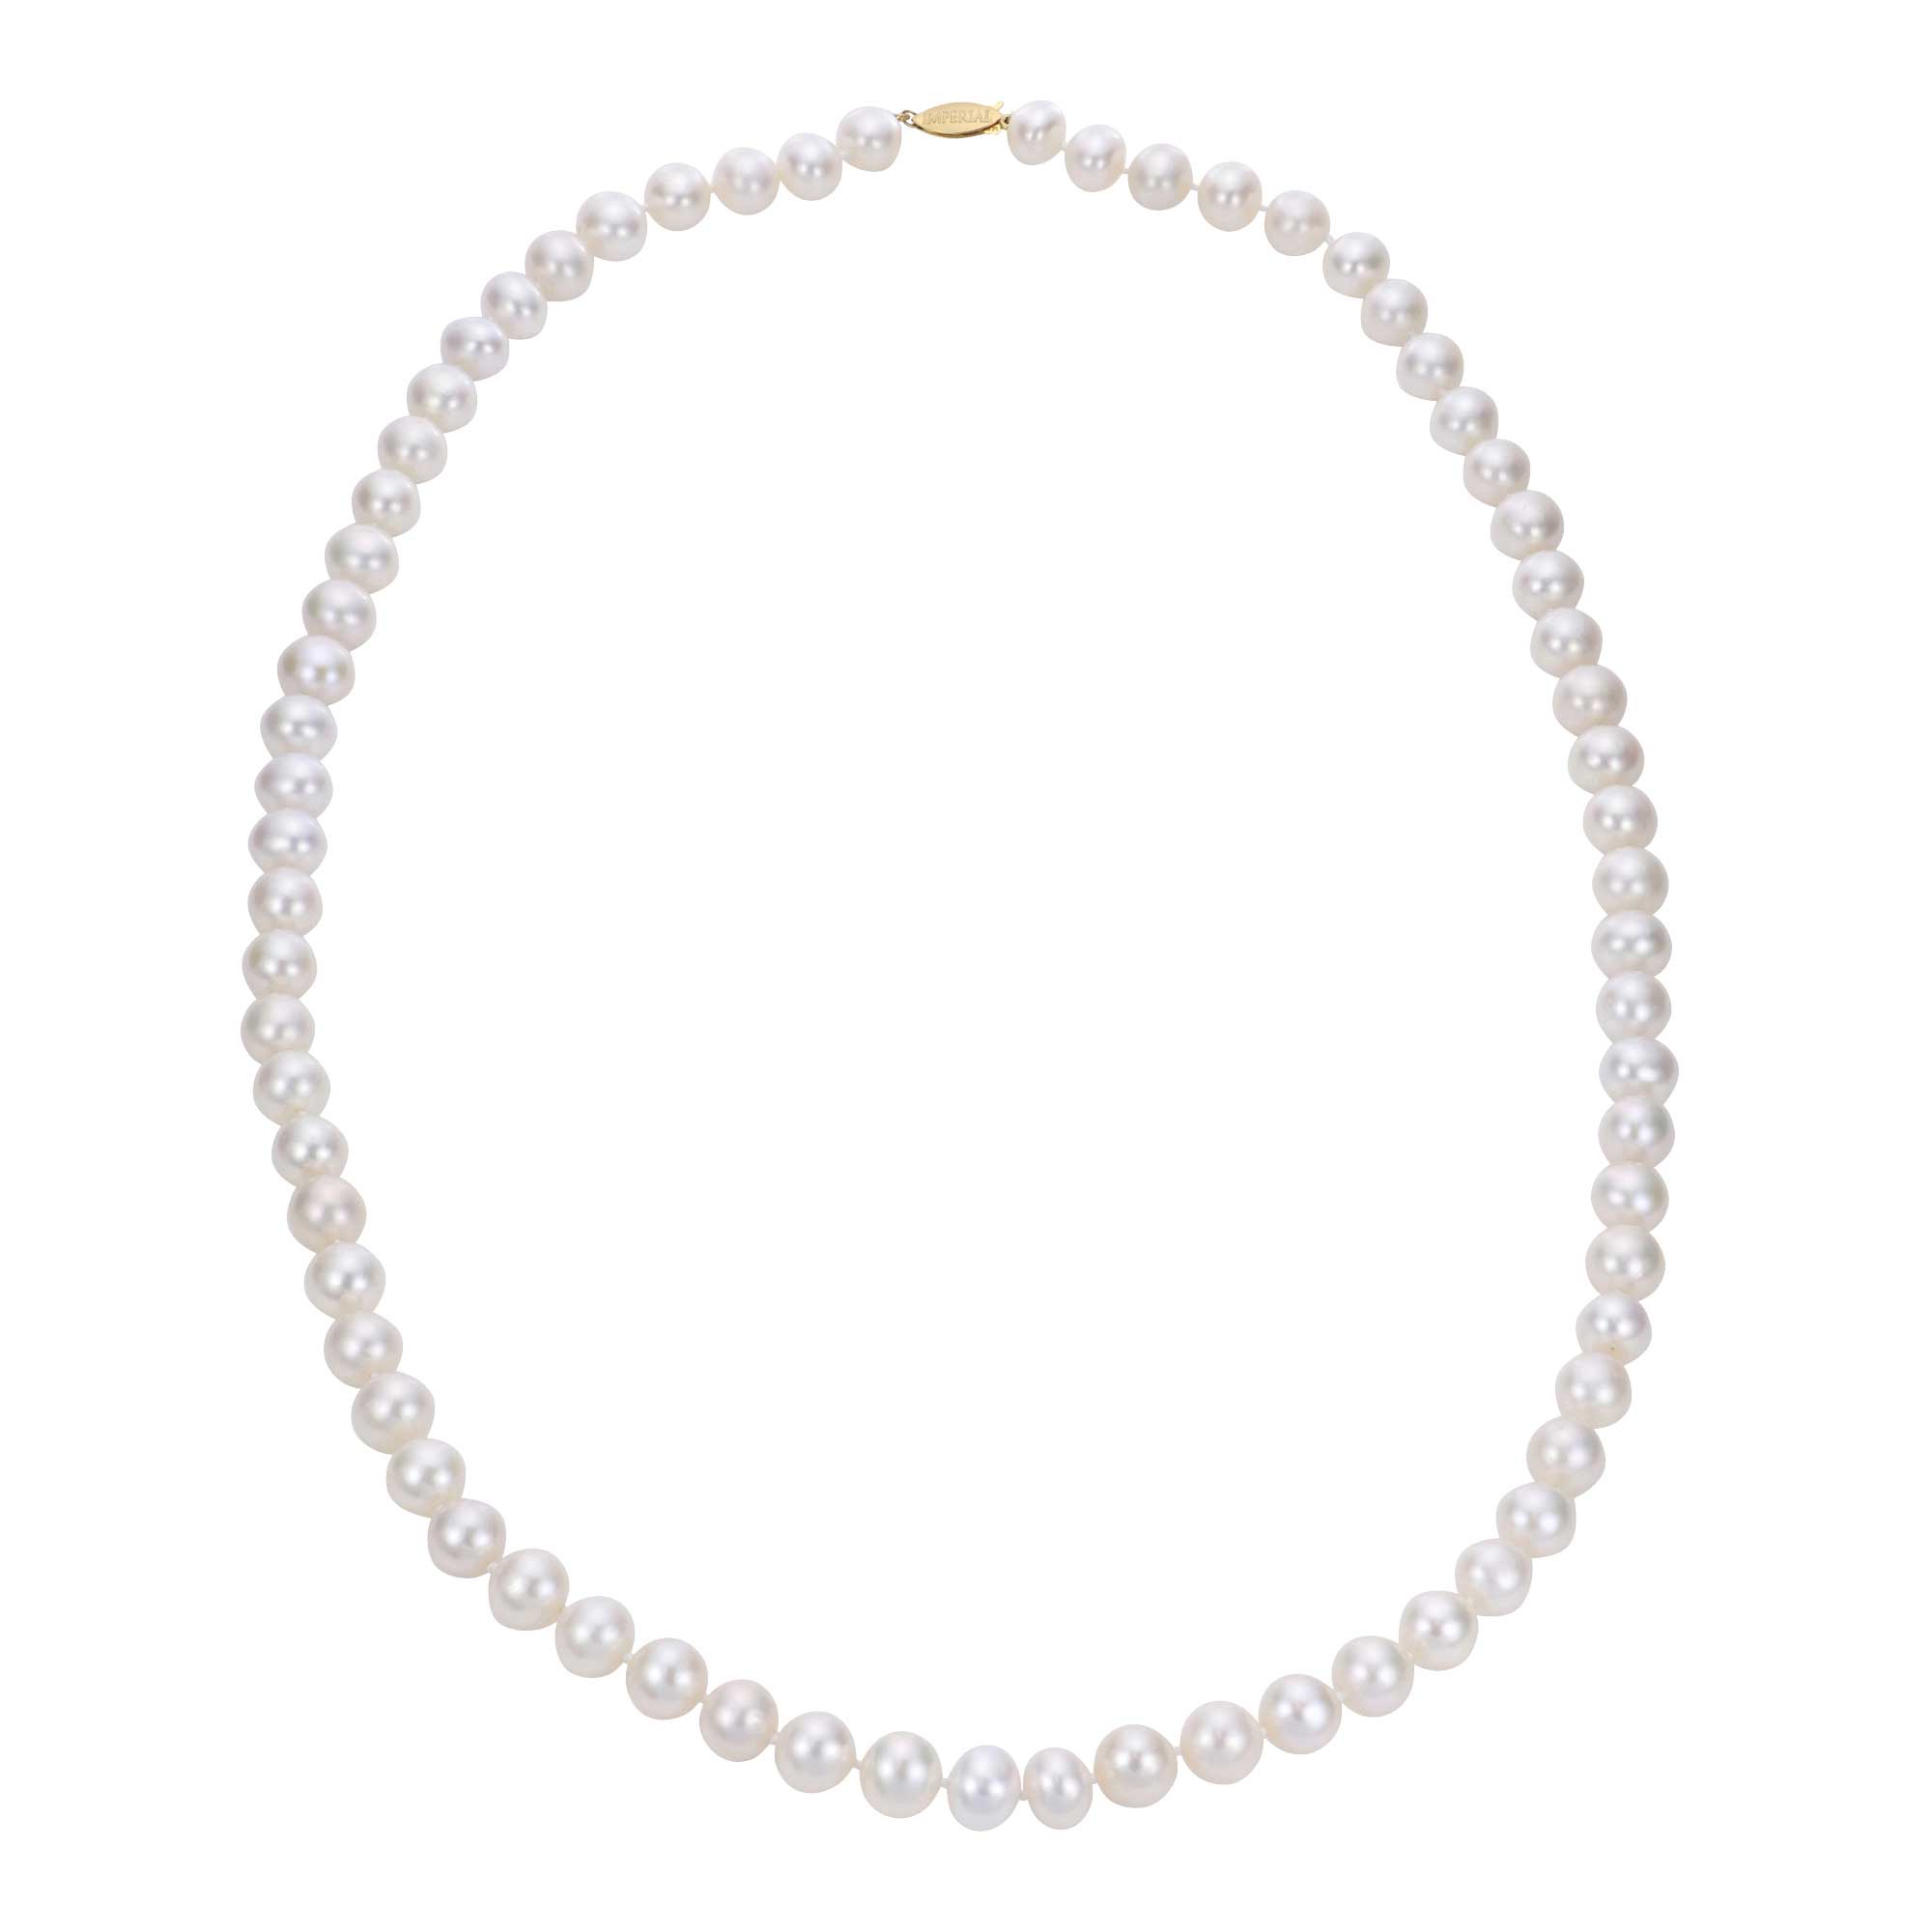 6.5-7mm Akoya Cultured Pearl Strand Necklace, 24 Inches